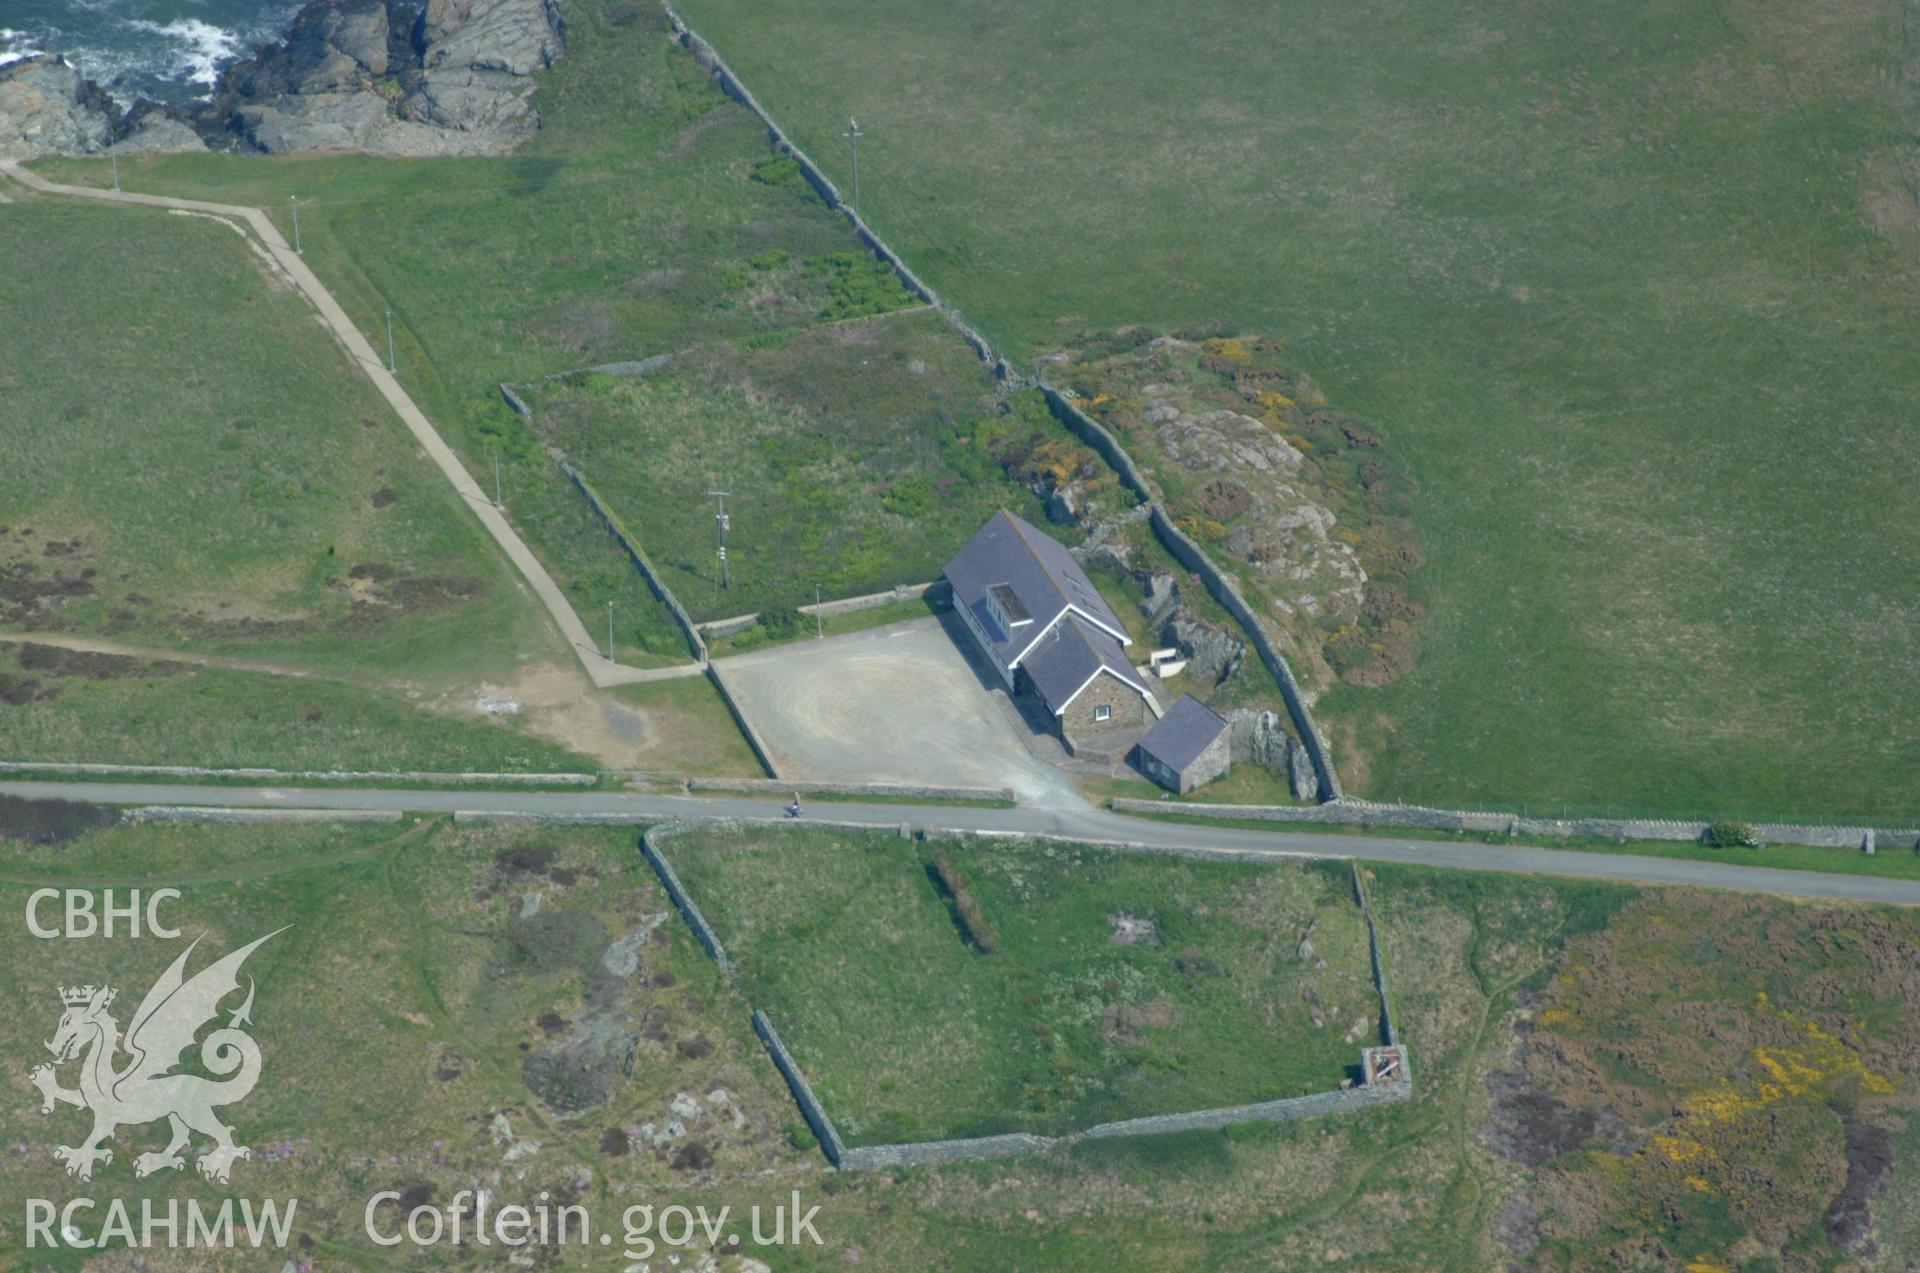 RCAHMW colour oblique aerial photograph of Elianus Point Lighthouse, Llaneilian taken on 26/05/2004 by Toby Driver